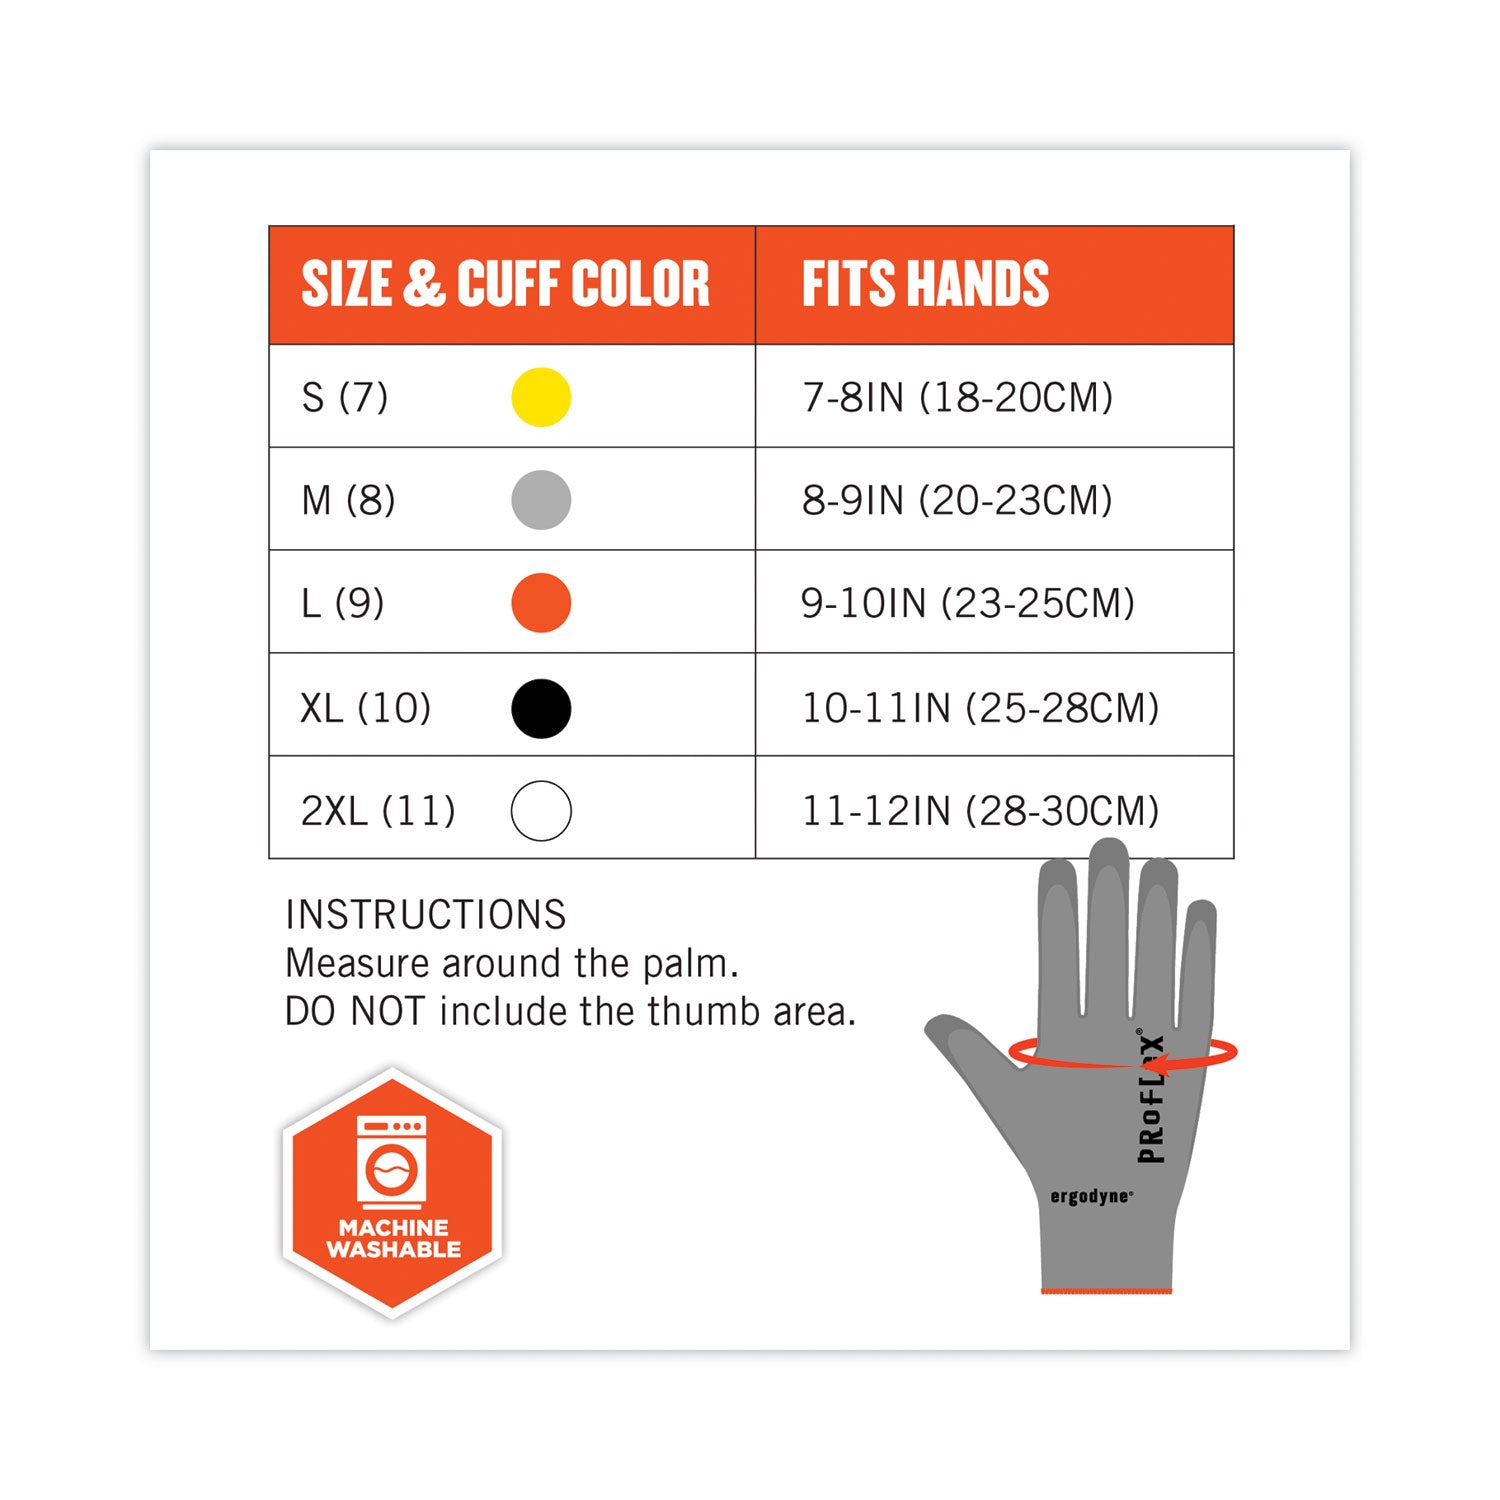 proflex-7024-ansi-a2-pu-coated-cr-gloves-gray-large-pair-ships-in-1-3-business-days_ego10404 - 2